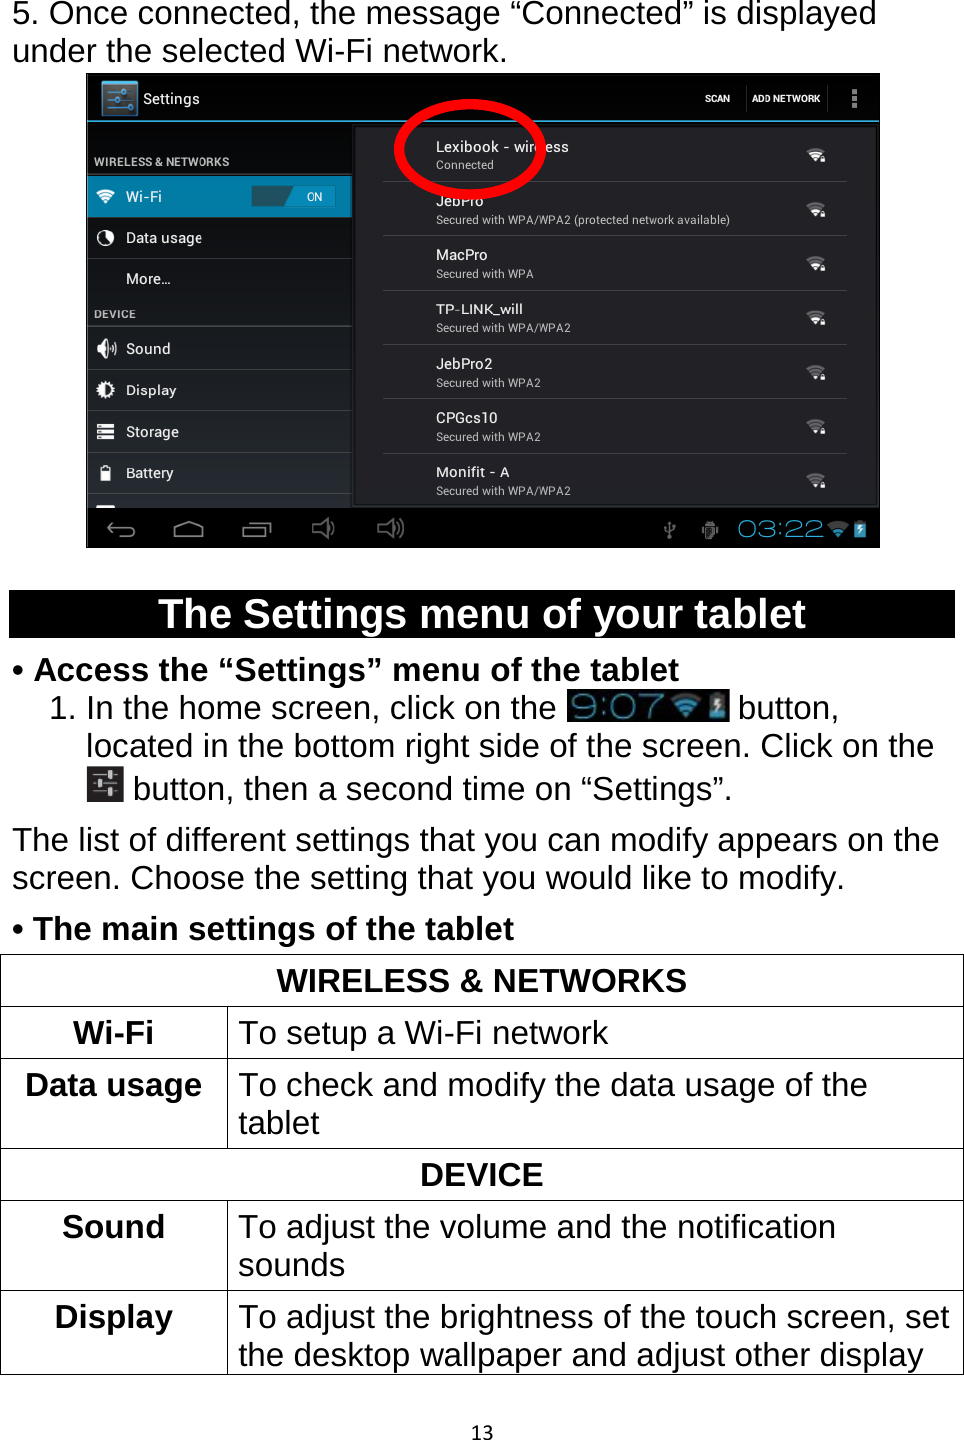 13  5. Once connected, the message “Connected” is displayed under the selected Wi-Fi network.   The Settings menu of your tablet • Access the “Settings” menu of the tablet 1. In the home screen, click on the   button, located in the bottom right side of the screen. Click on the  button, then a second time on “Settings”. The list of different settings that you can modify appears on the screen. Choose the setting that you would like to modify.  • The main settings of the tablet WIRELESS &amp; NETWORKS Wi-Fi To setup a Wi-Fi network Data usage To check and modify the data usage of the tablet DEVICE Sound To adjust the volume and the notification sounds Display  To adjust the brightness of the touch screen, set the desktop wallpaper and adjust other display 